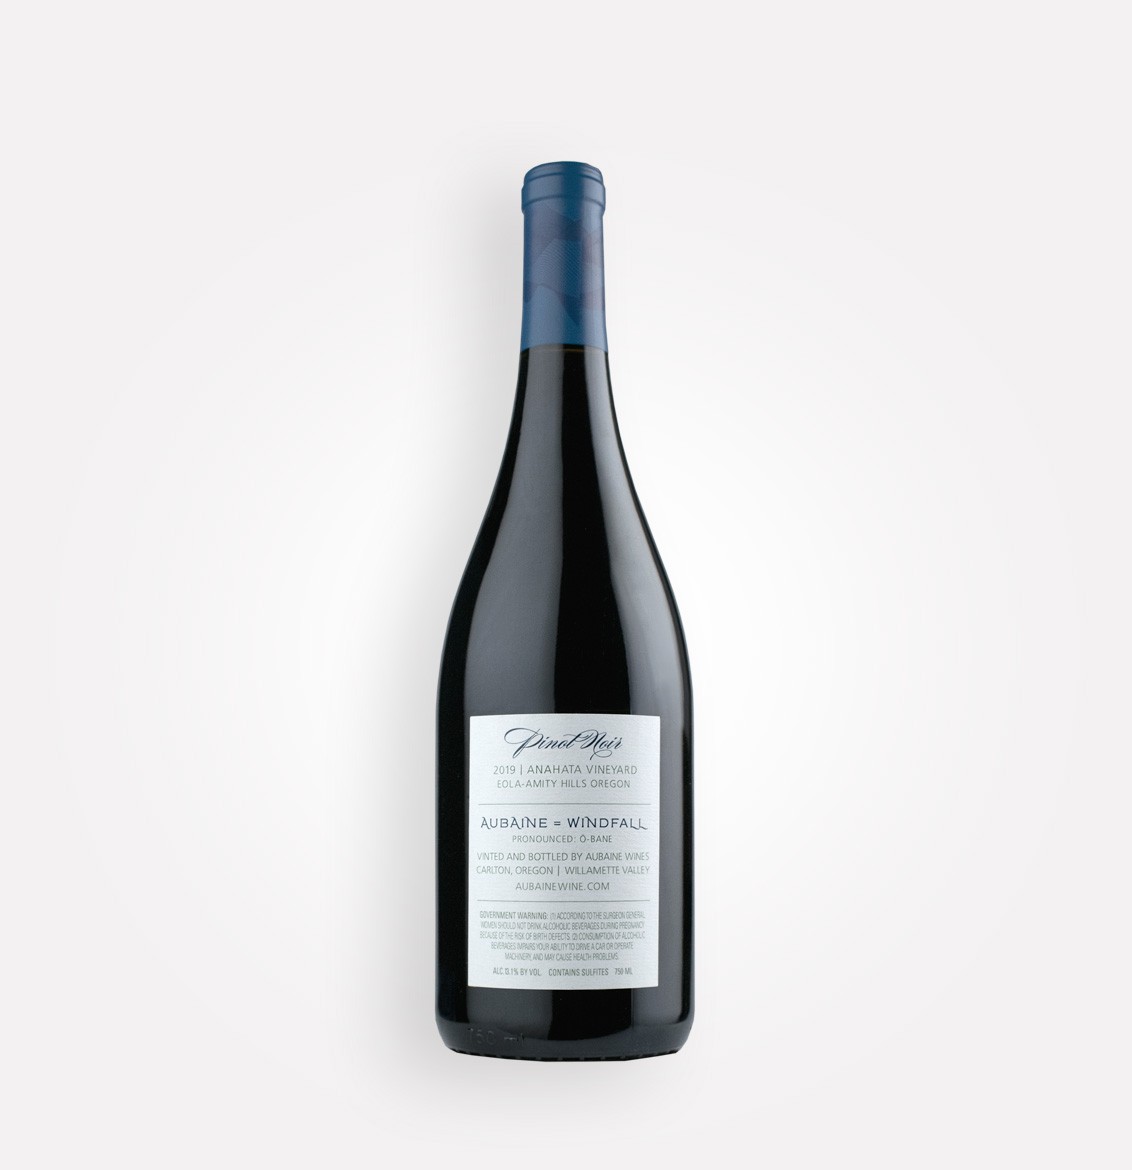 Back bottle view of Aubaine 2019 Pinot Noir wine from Oregon's Eola-Amity Hills